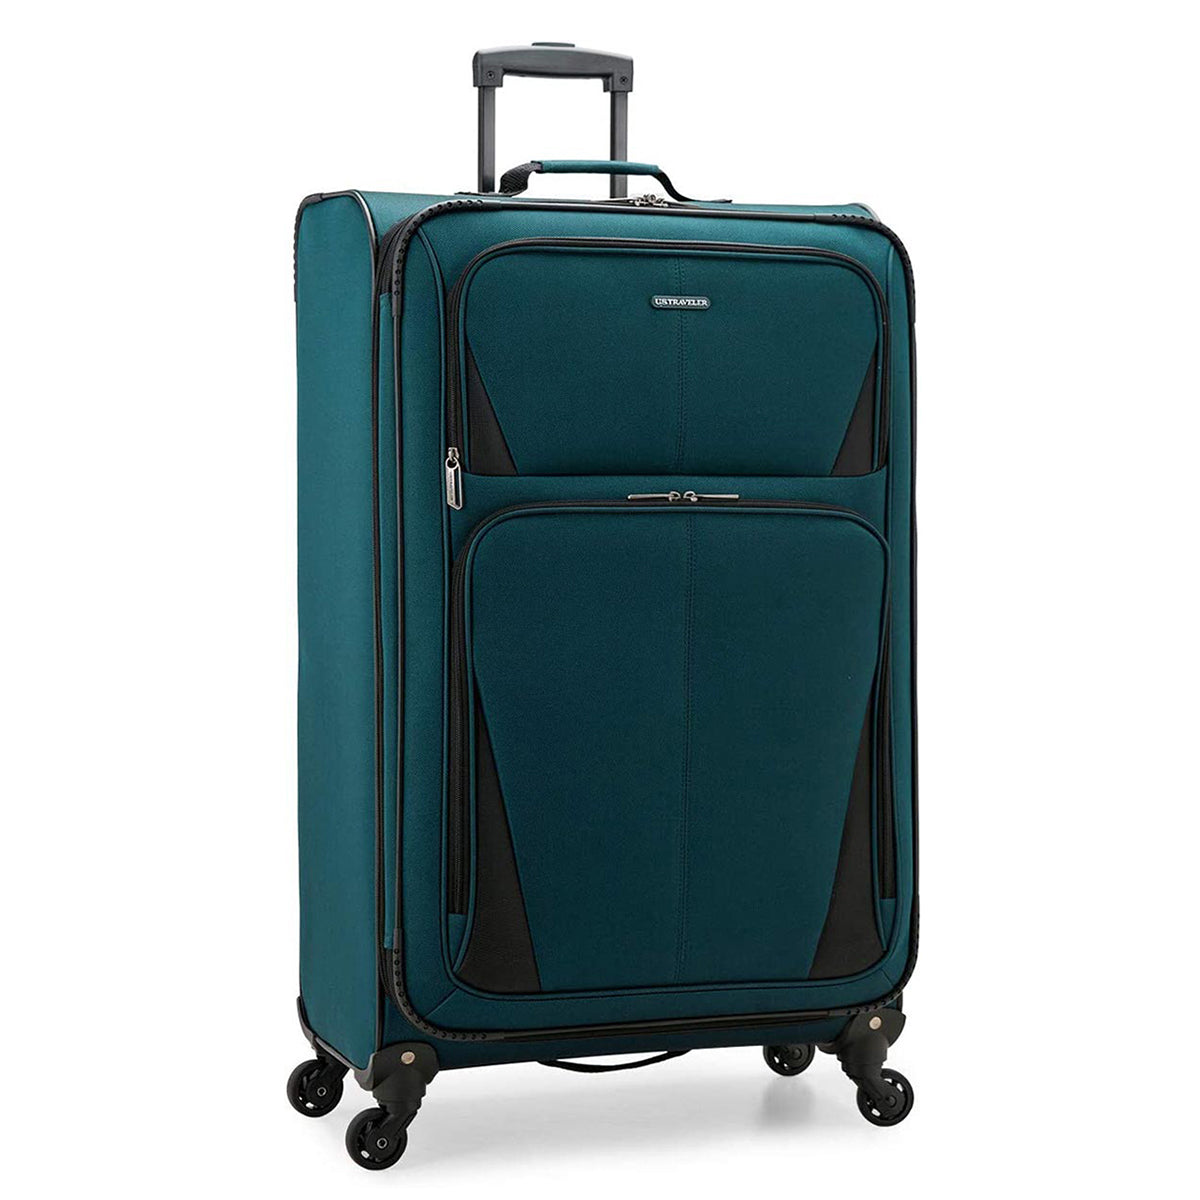  U.S. Traveler Aviron Bay Expandable Softside Luggage with Spinner Wheels, Checked 30-Inch